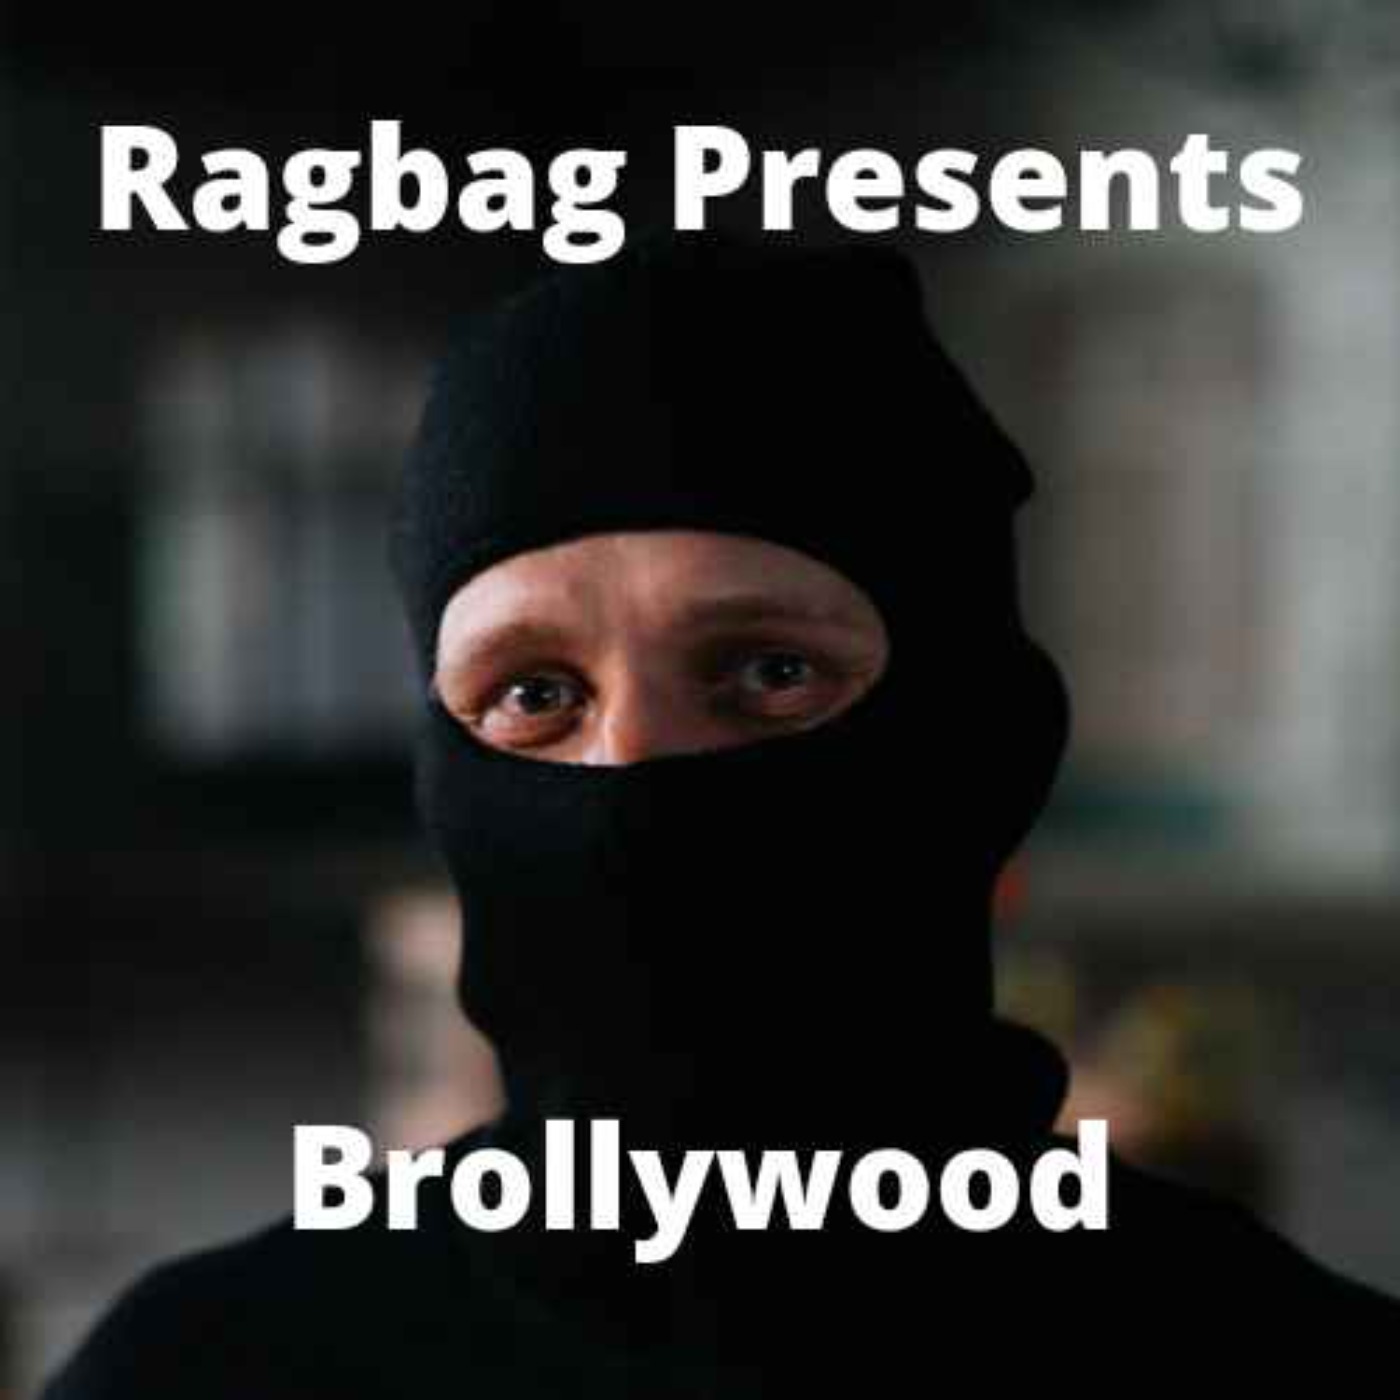 Introduction to Ragbag Presents: Brollywood